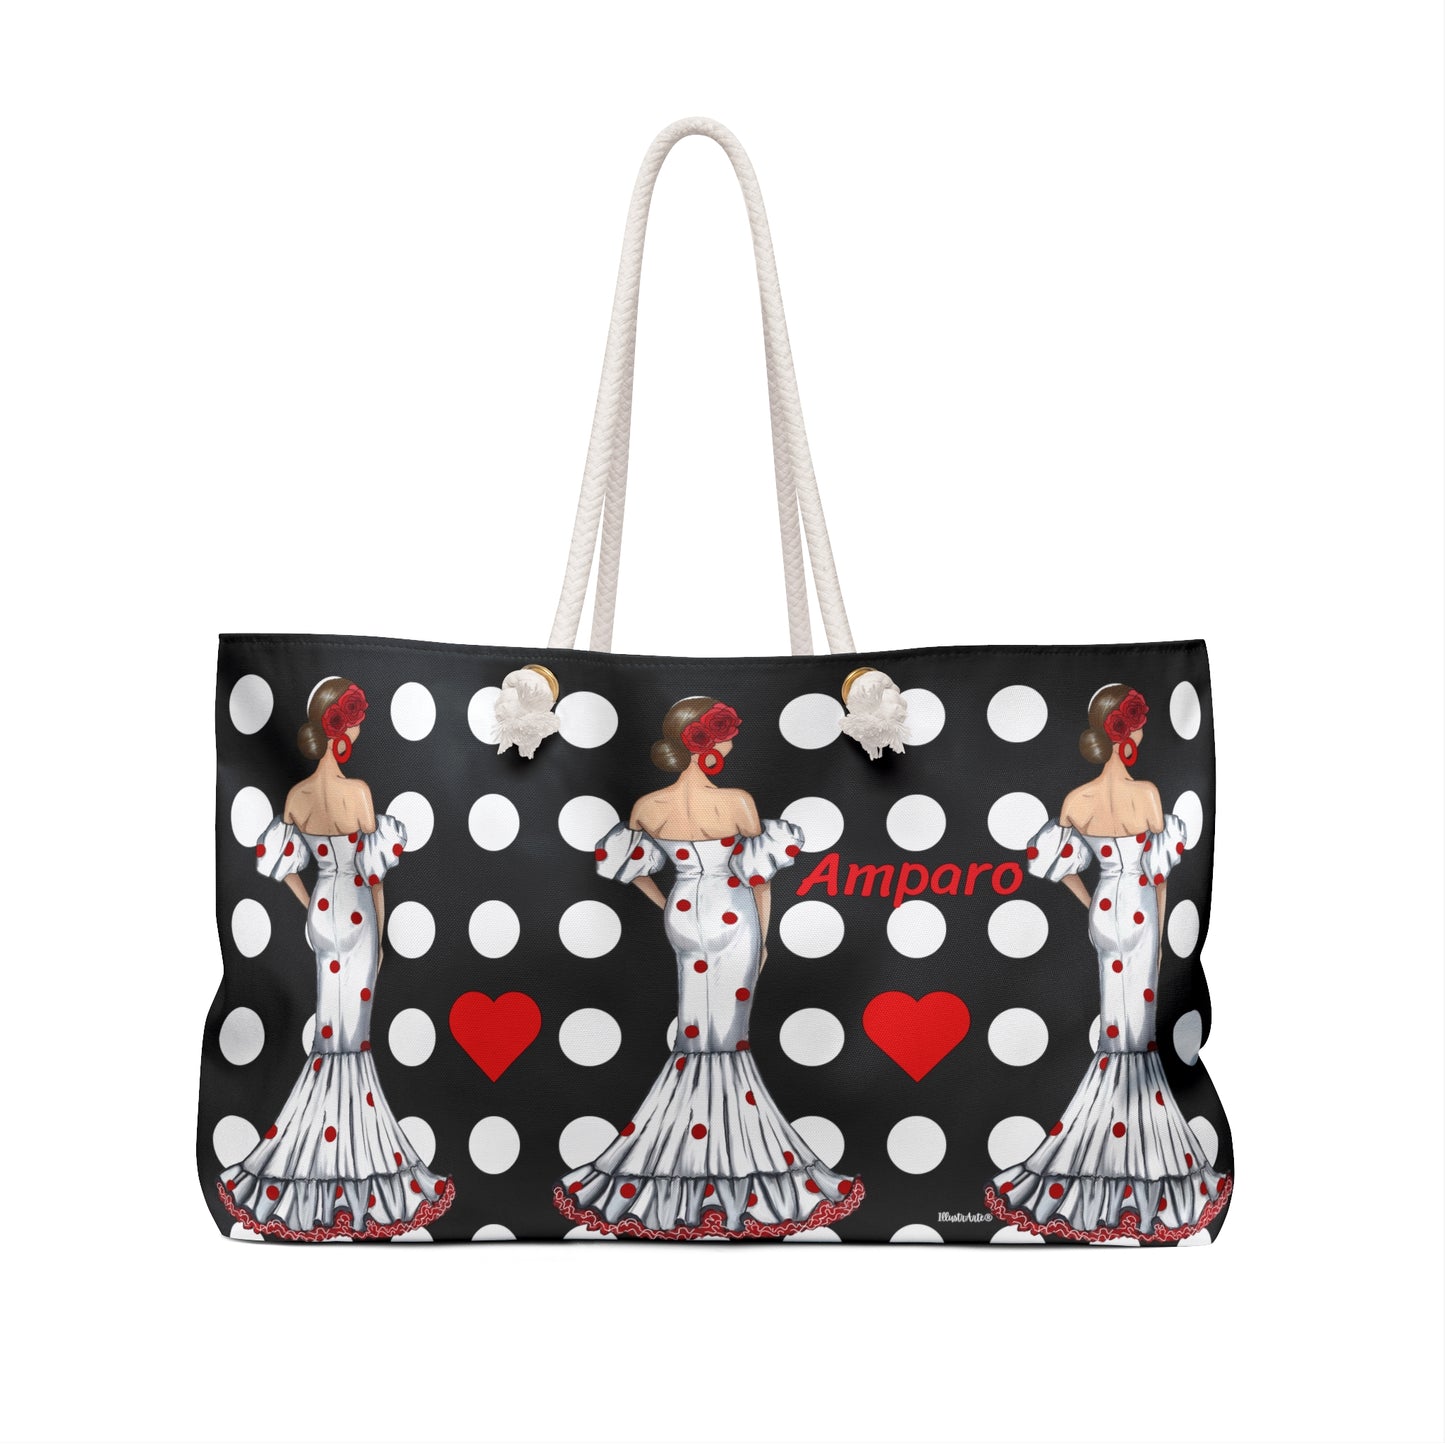 Flamenco Lovers Weekender Bag - Oversized Beach Tote with Durable Rope Handles. Our flamenco dancer Maite with black background and polka dots.